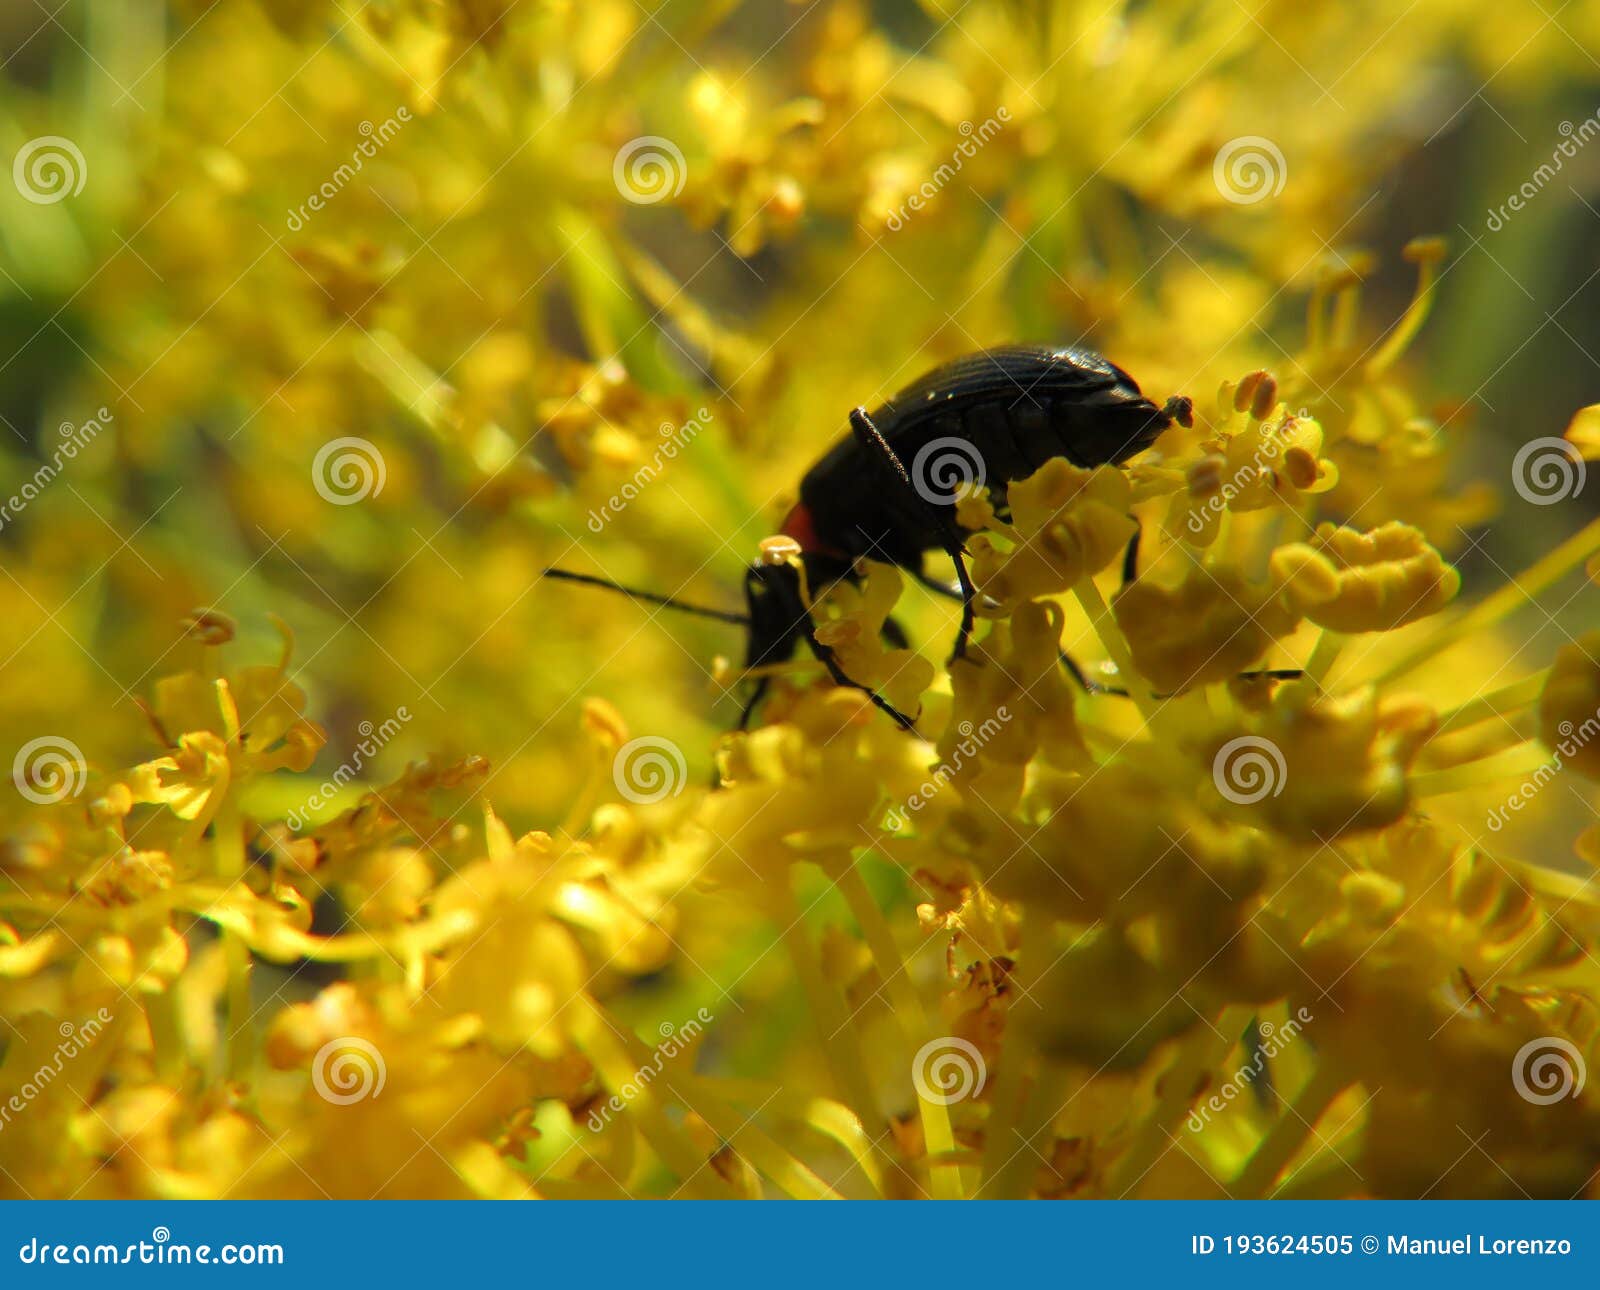 insect flower pollination beautiful natural macro beetle